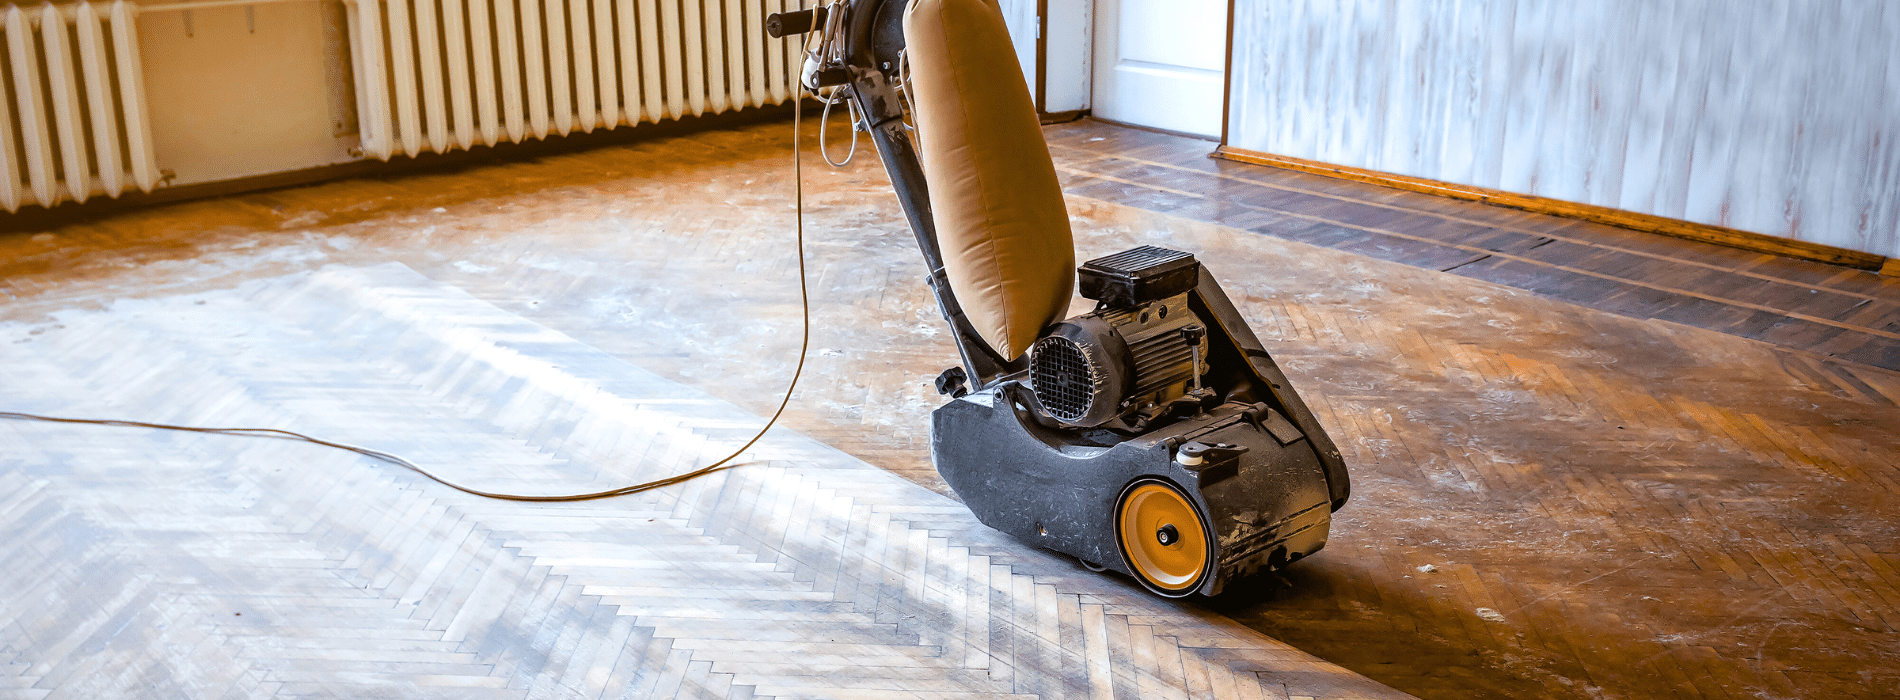 For clean and effective hardwood floor sanding in Chatham, ME4, Mr Sander® use the Bona Scorpion, a 200mm drum sander (1.5 kW, 240V, 50Hz) coupled to a HEPA-filtered dust extraction system.